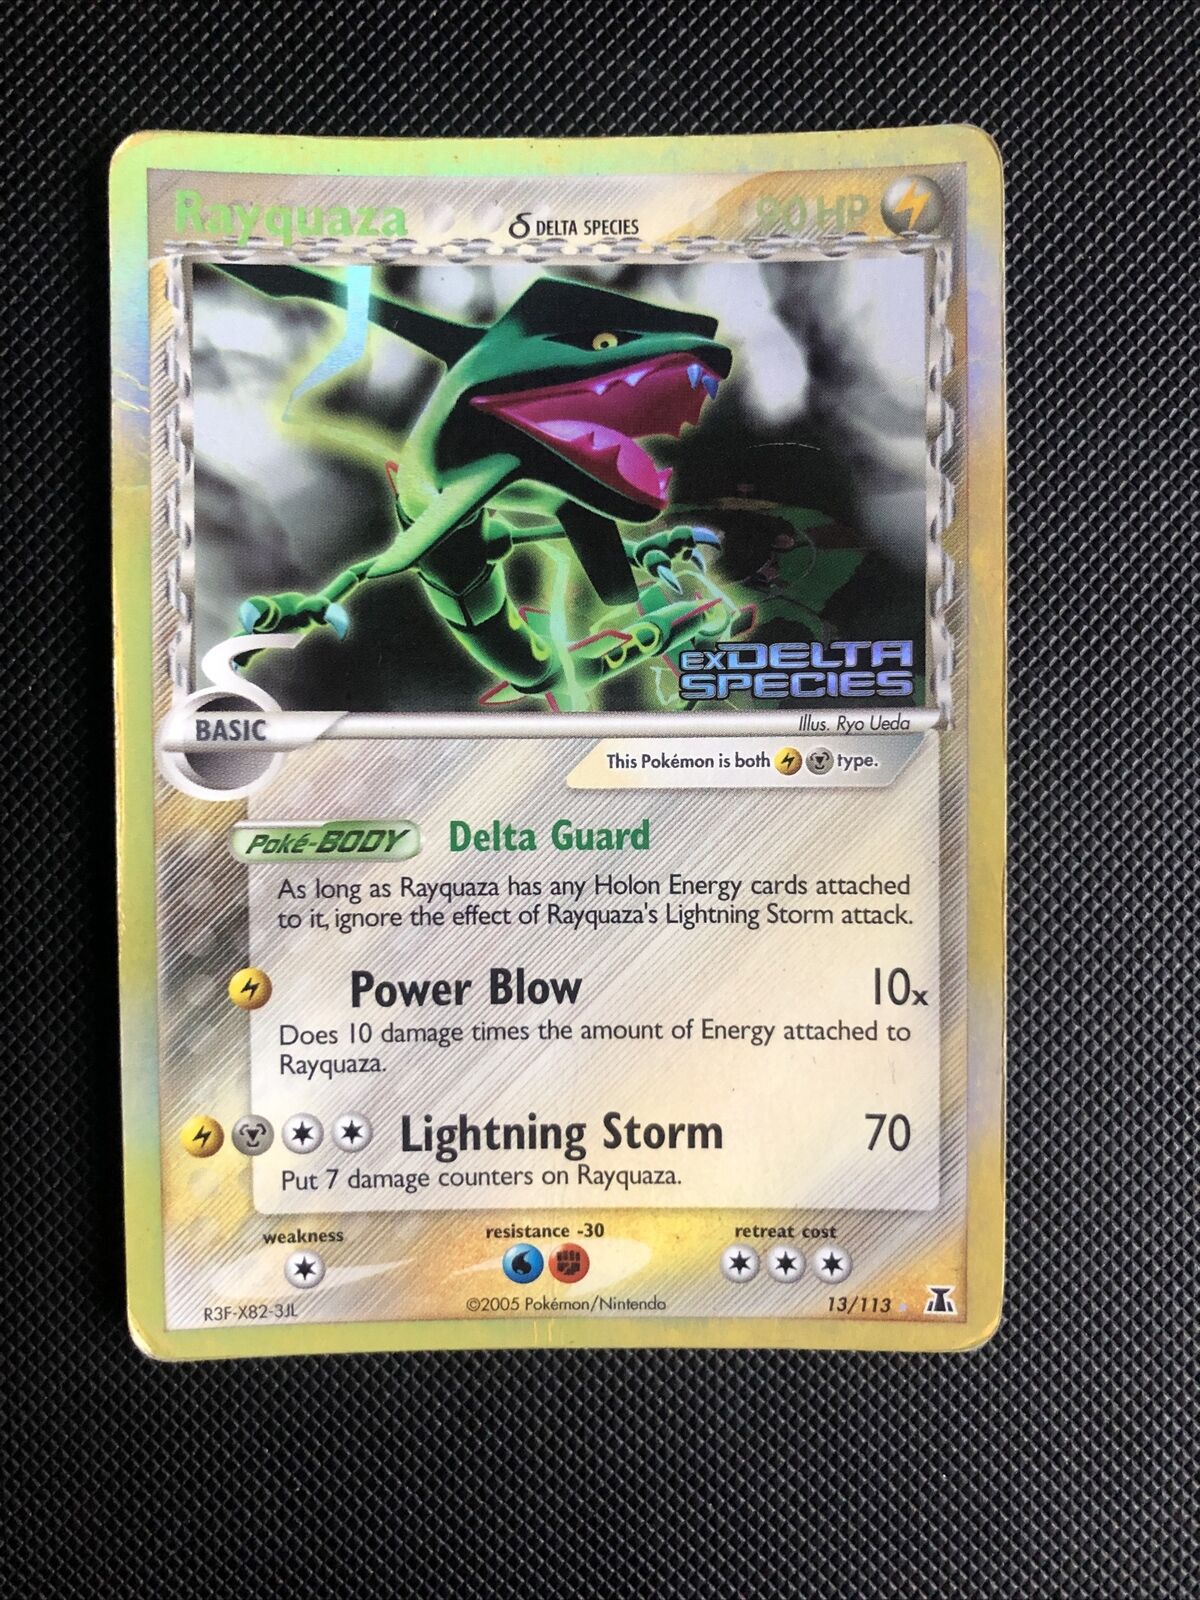 Rayquaza Reverse Holo - 13/113 - STAMPED - Ex Delta Species (2005) MP